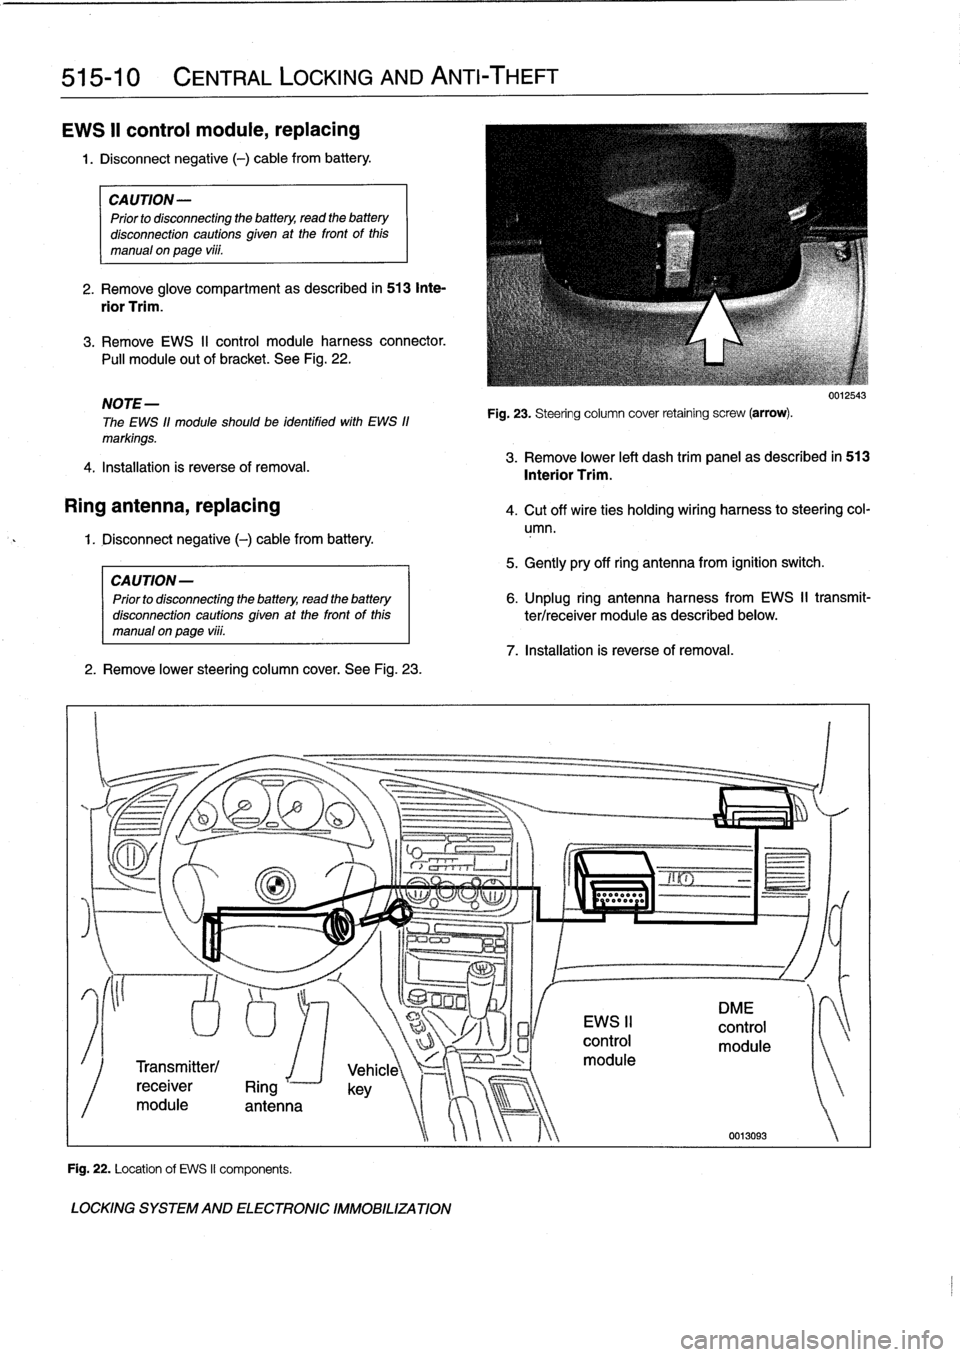 BMW 328i 1994 E36 Owners Manual 
515-10

	

CENTRAL
LOCKING
AND
ANTI-THEFT

EWS
II
control
module,
replacing

1
.
Disconnect
negative
(-)
cable
from
battery
.

CAUTION-

Prior
to
disconnecting
the
battery,
read
the
battery

disconne